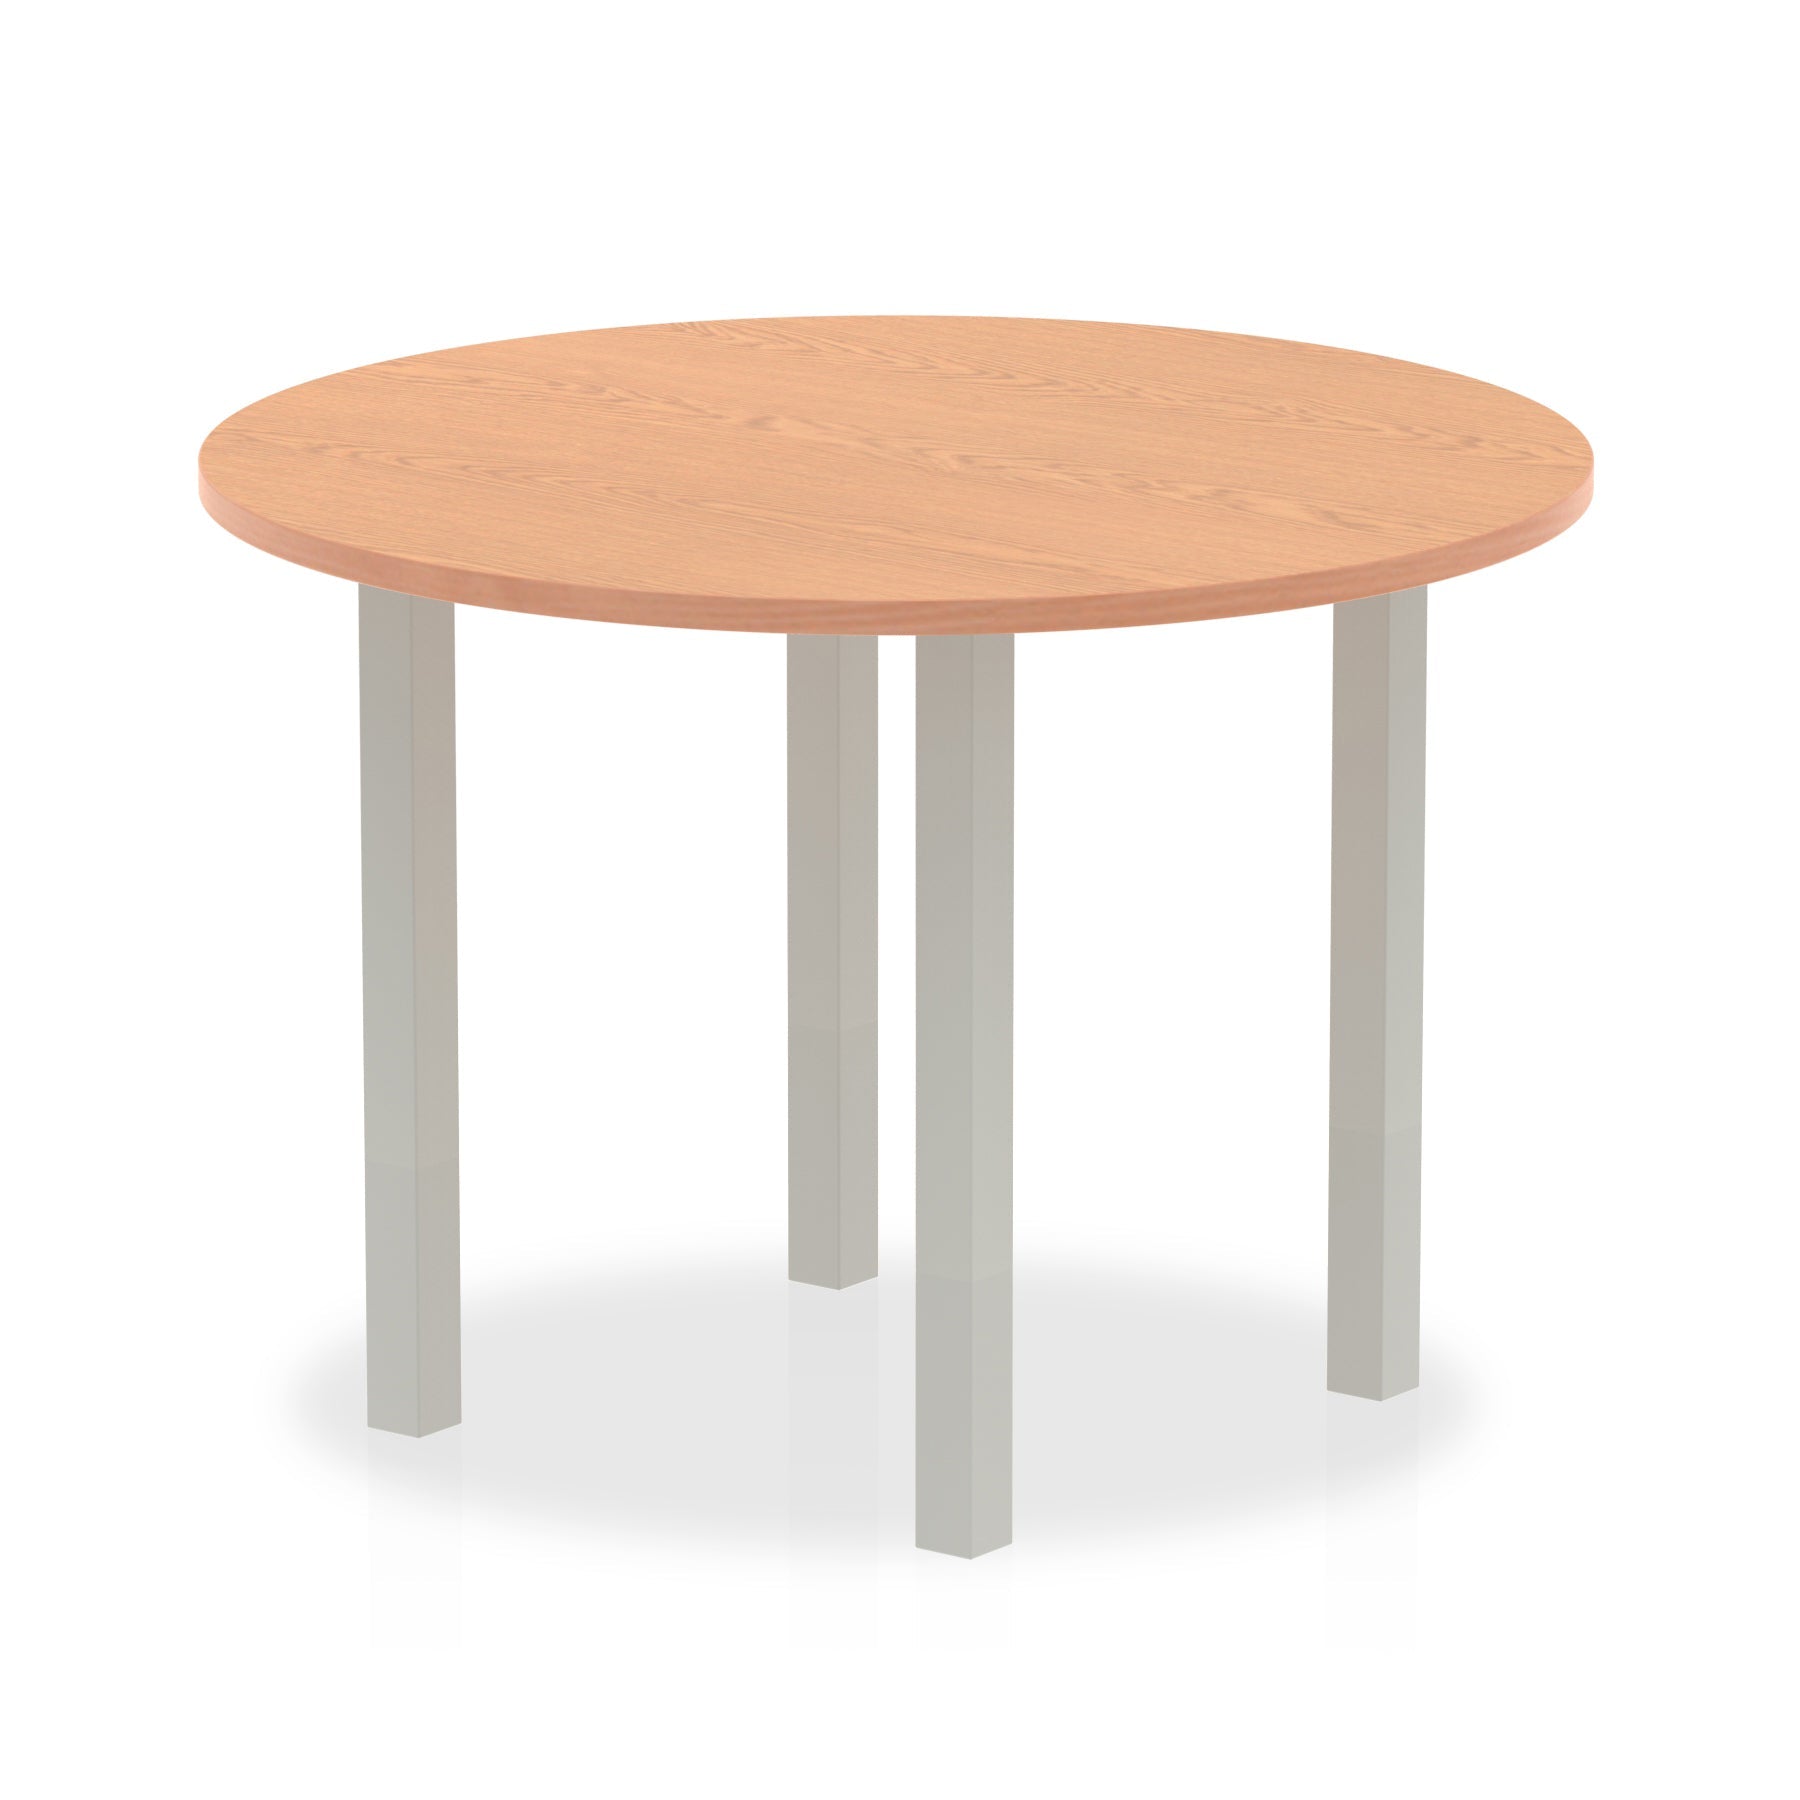 Impulse Round Table with Post Leg - 1000x1000 or 1200x1200 MFC Top, 5-Year Guarantee, Self-Assembly, Multiple Frame Colors